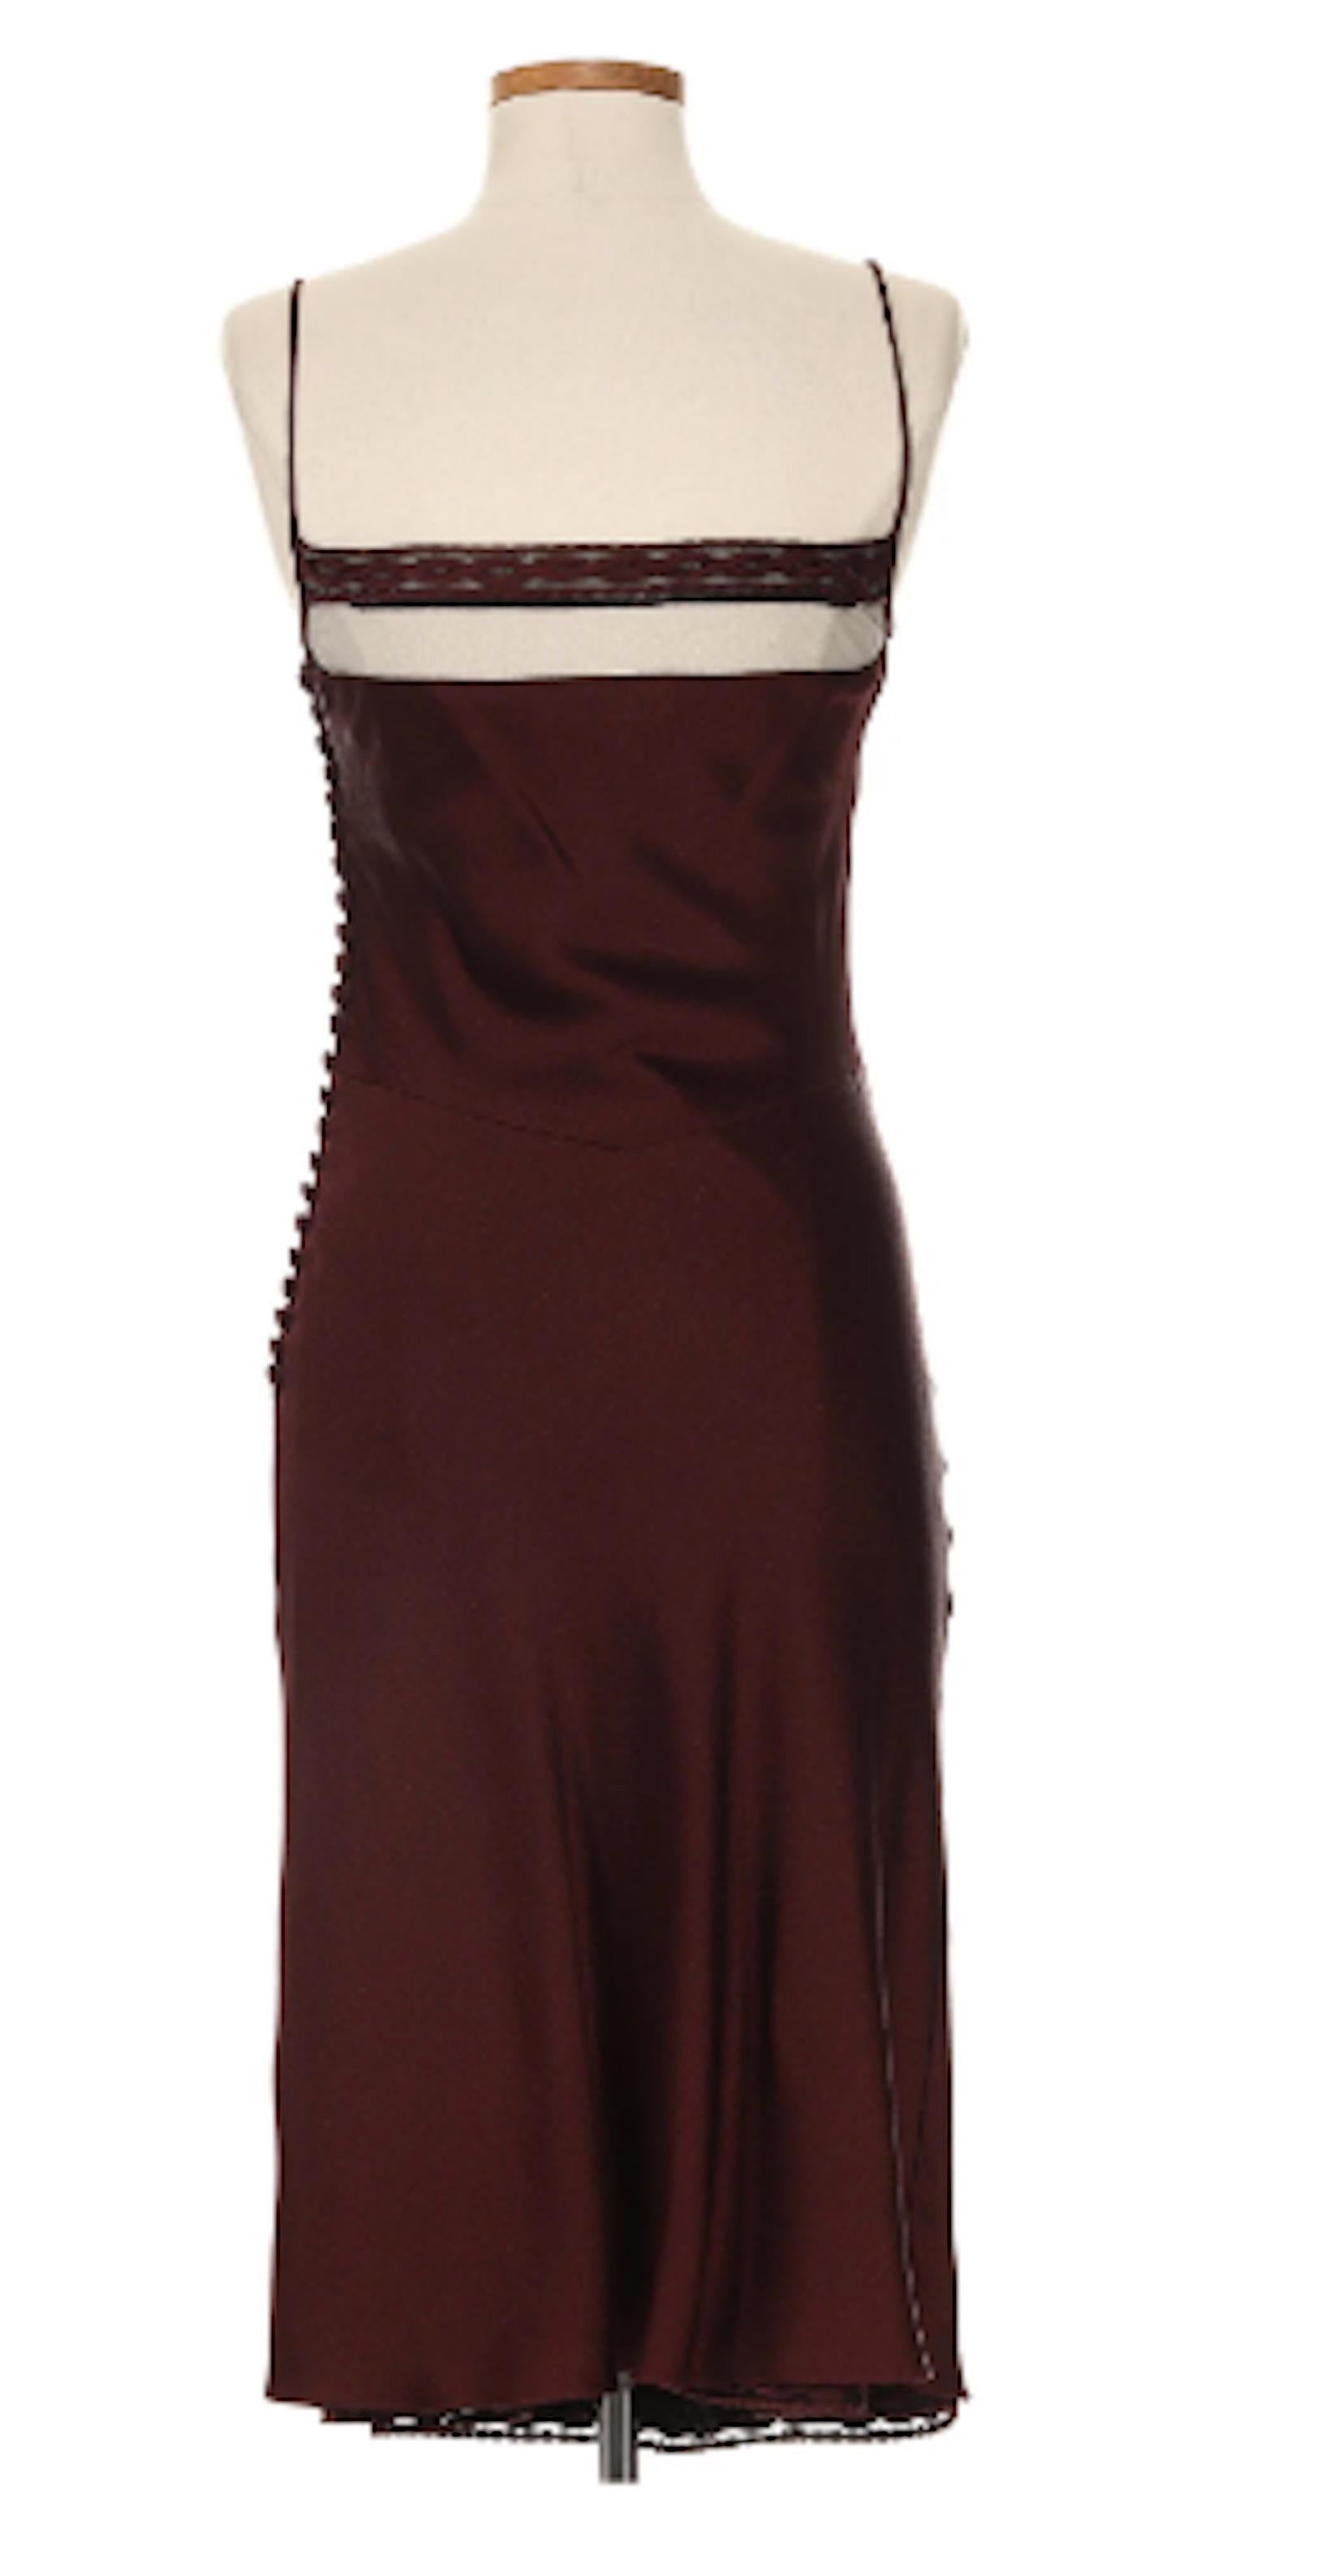 Christian Dior By John Galliano Slip Dress In Excellent Condition For Sale In New York, NY